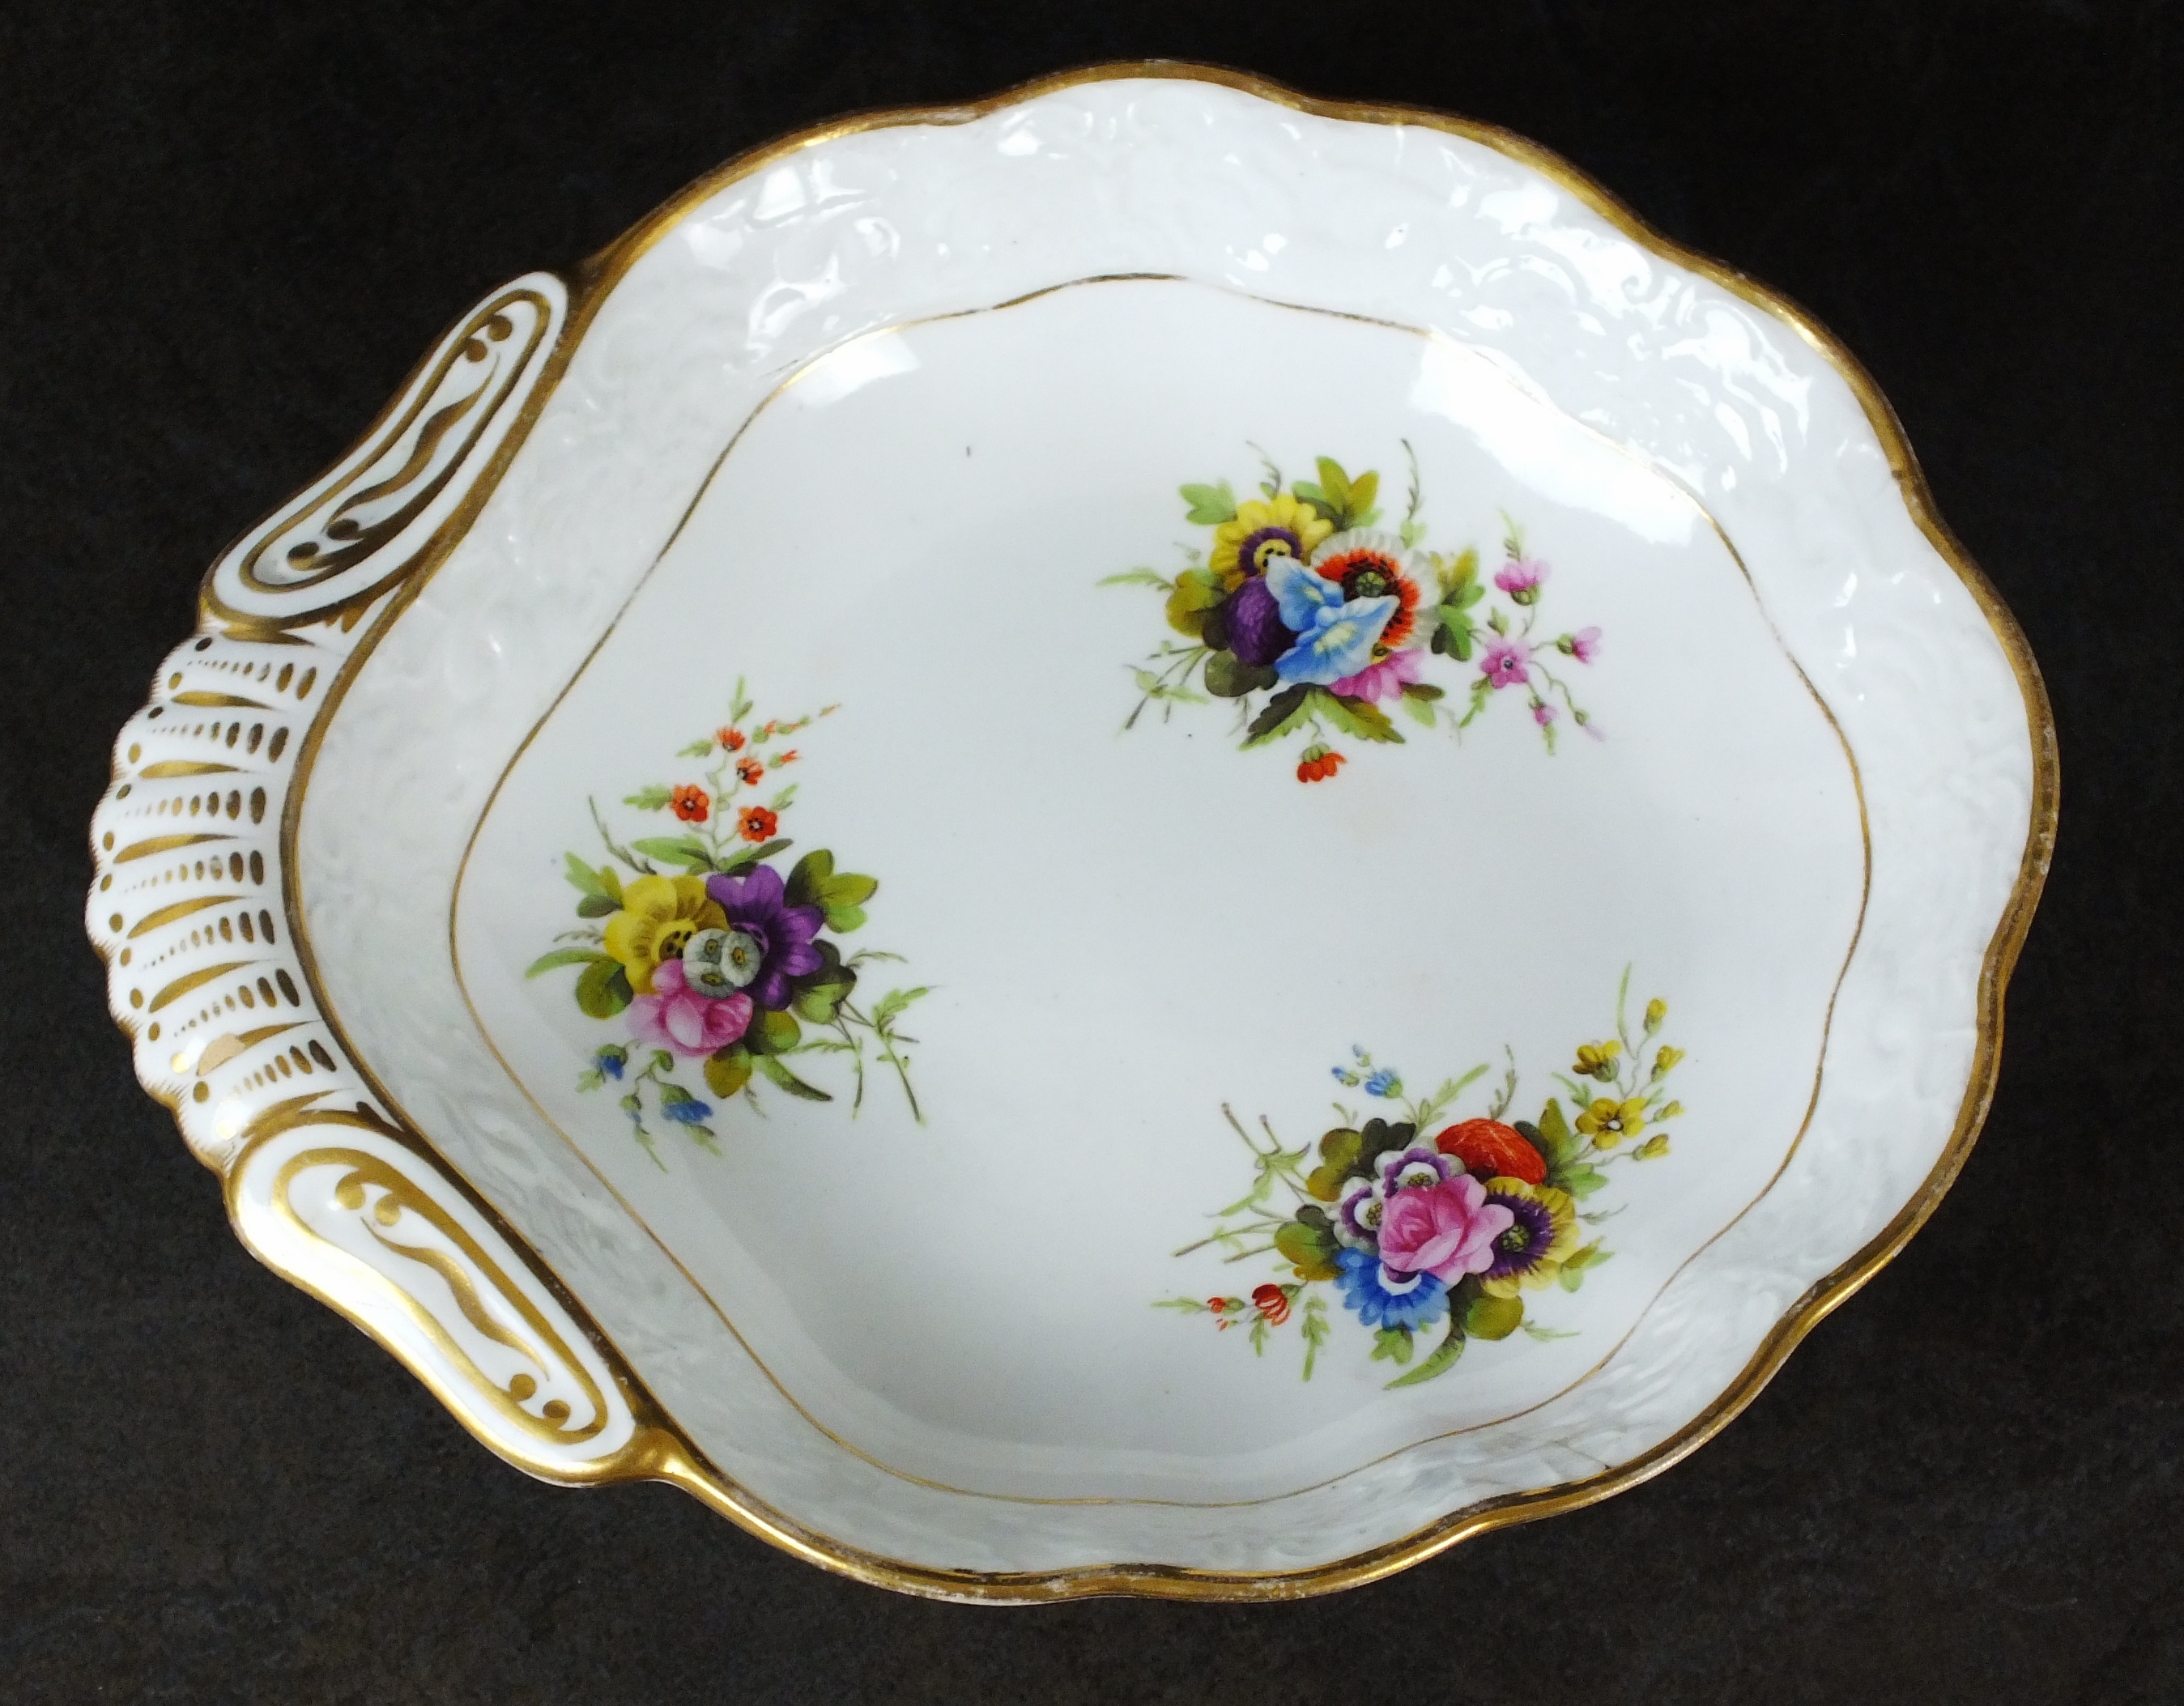 An early 19th century dessert dish, perhaps Swansea, - Image 2 of 3